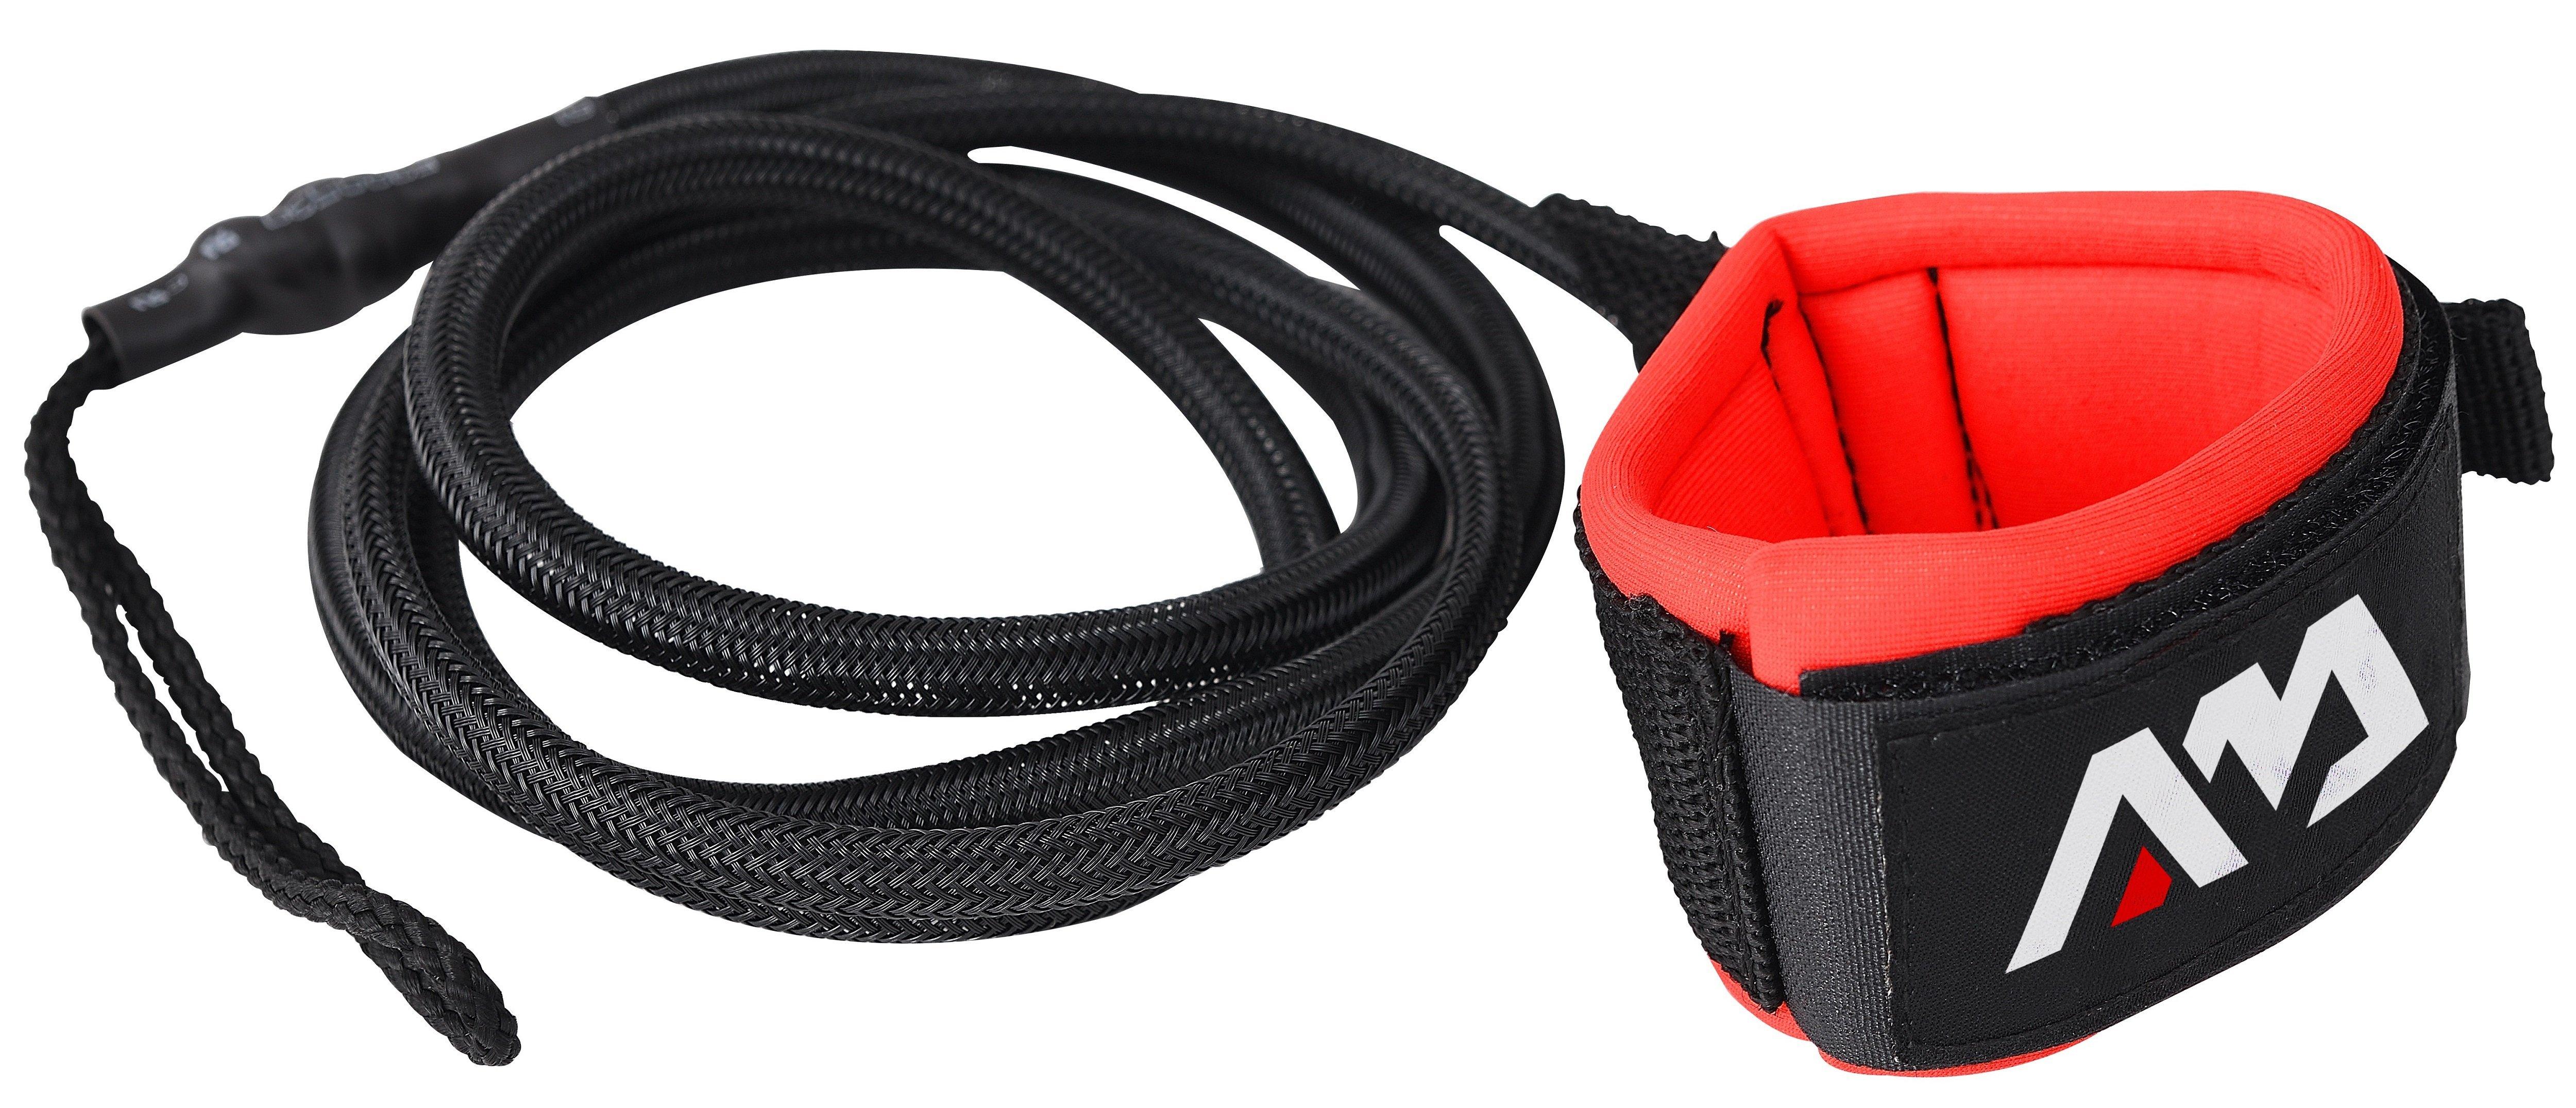 Paddle Board Standard Safety Leash 8'/5mm - Dti Direct USA